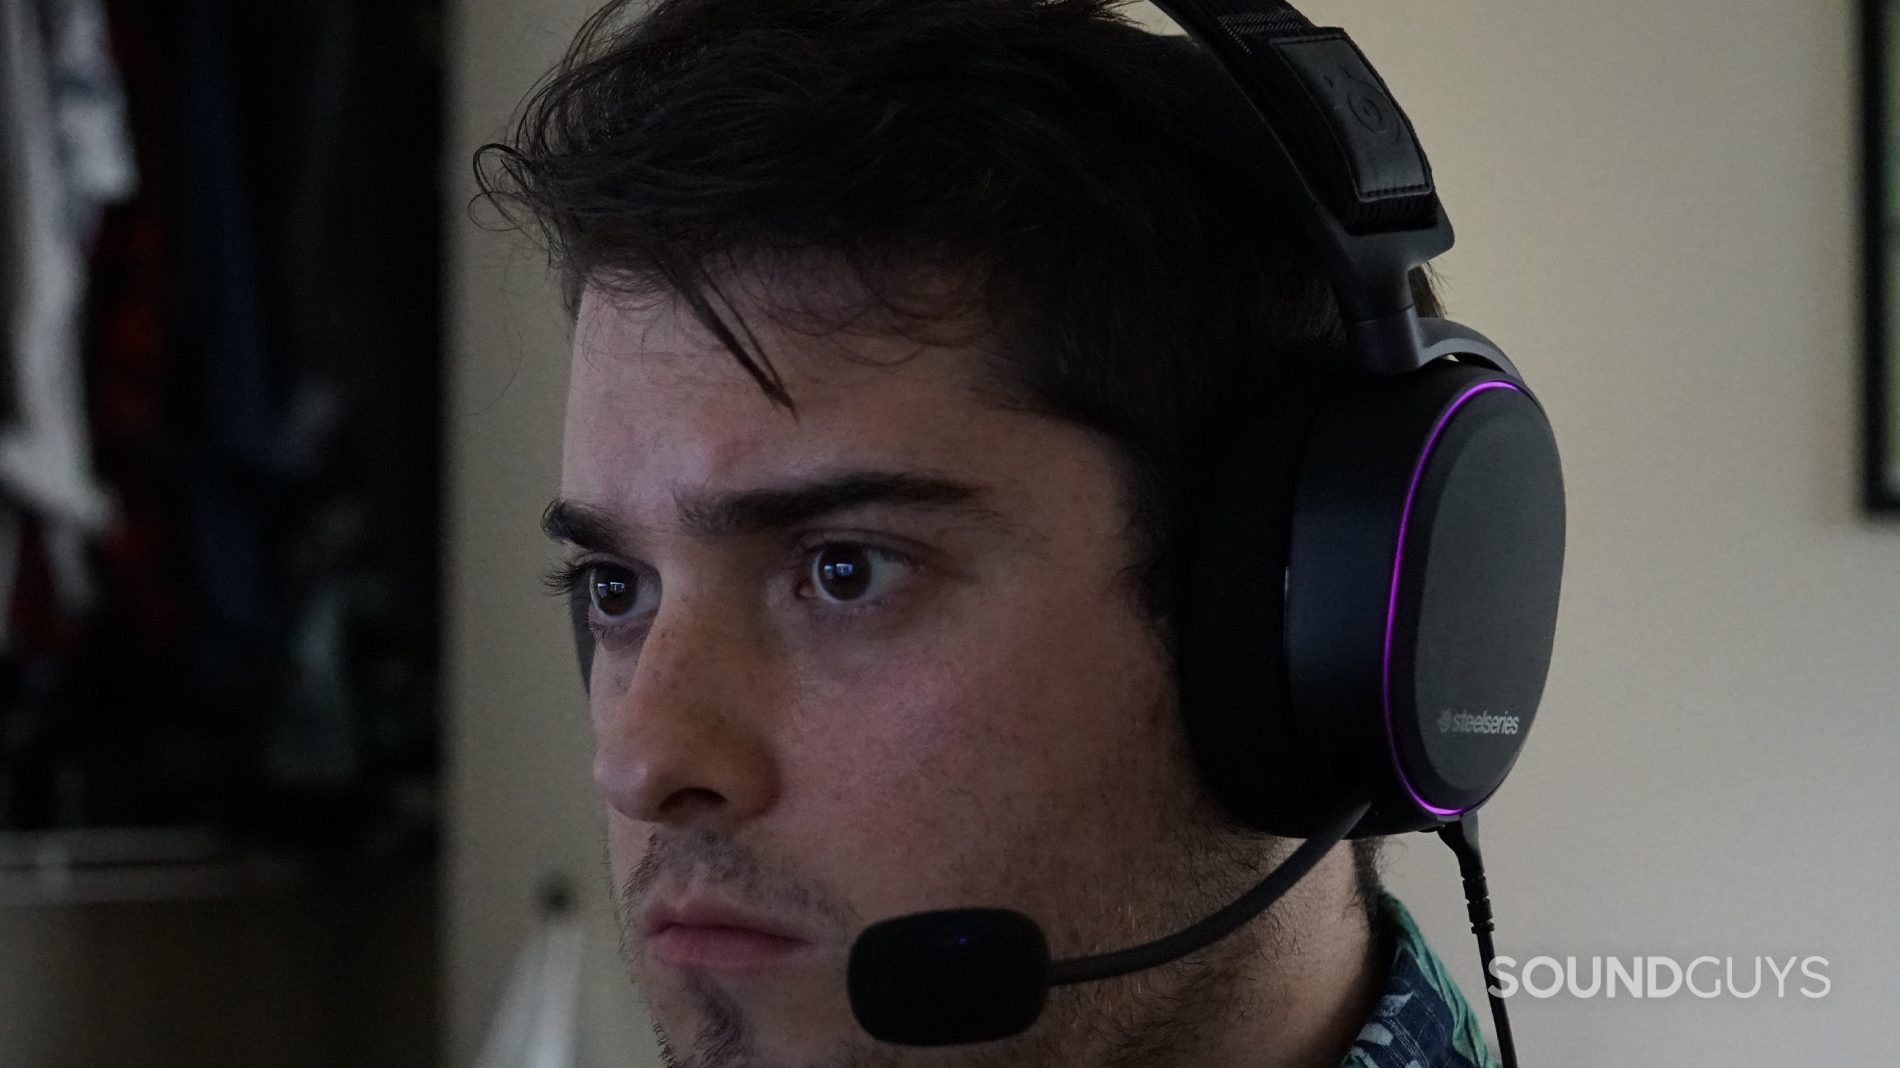 A man wears the SteelSeries Arctis Pro gaming shot.